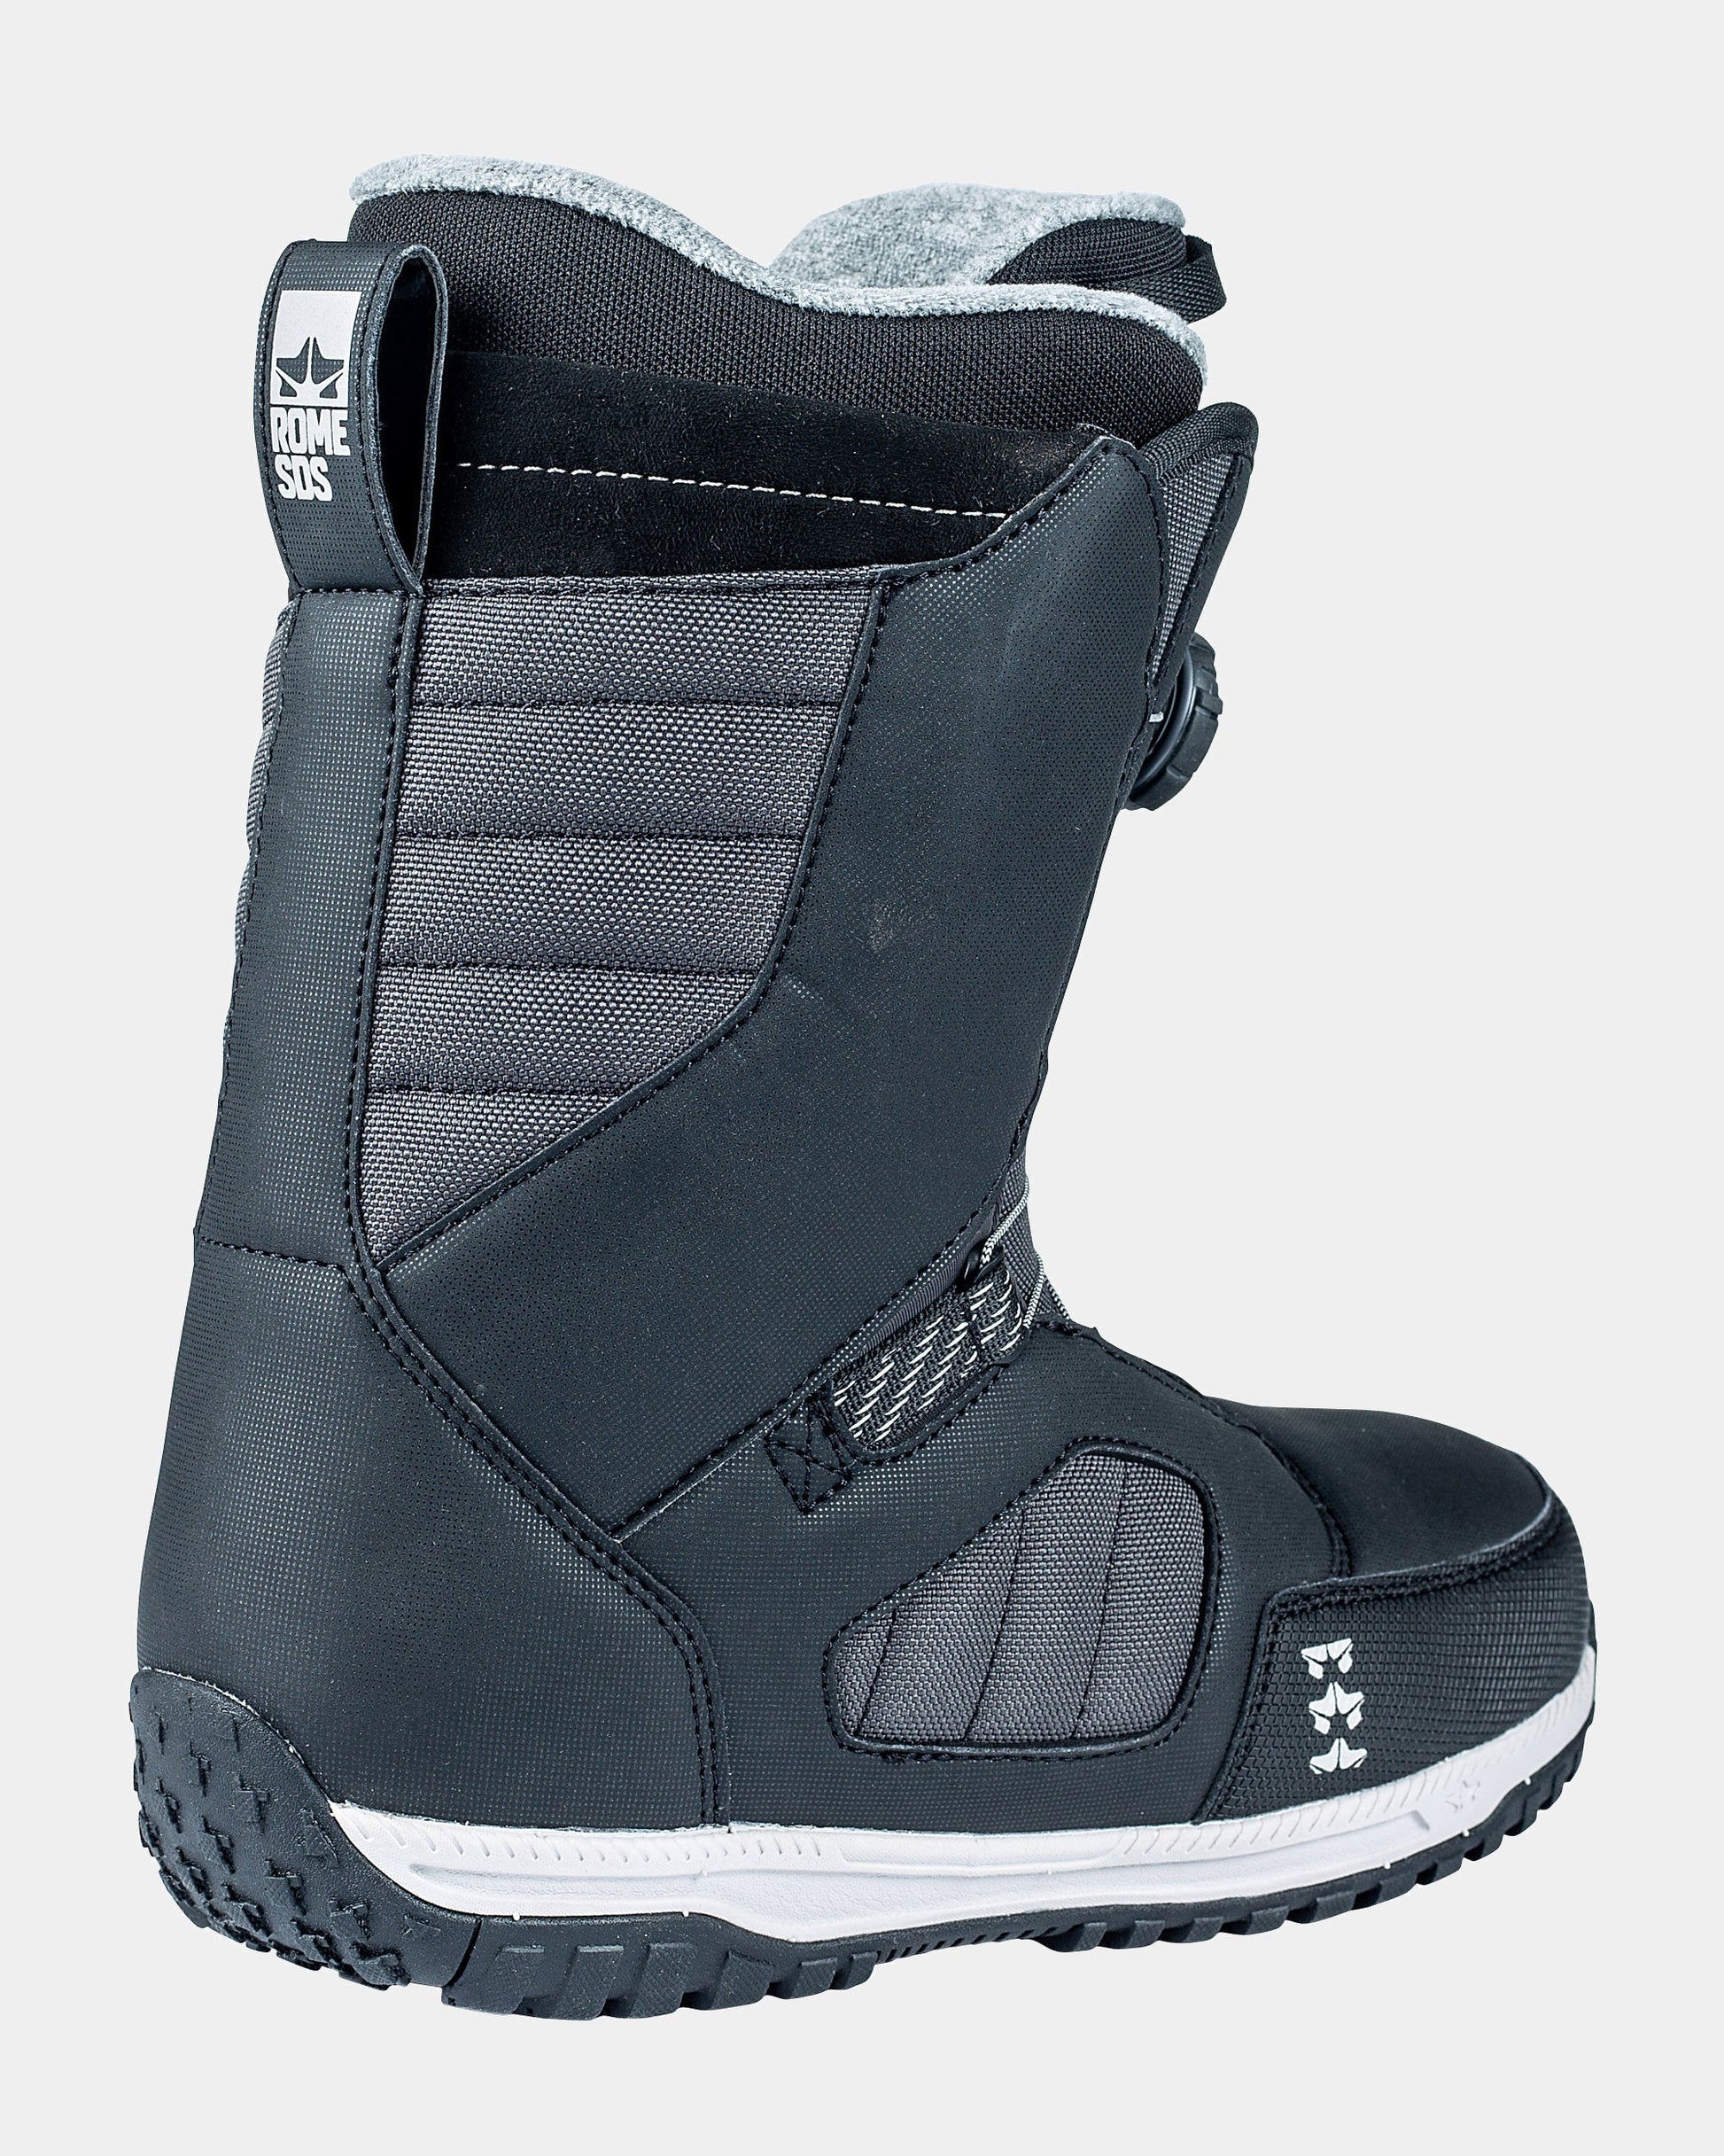 rome stomp boa review 2023-2024 men's snowboard boots product image